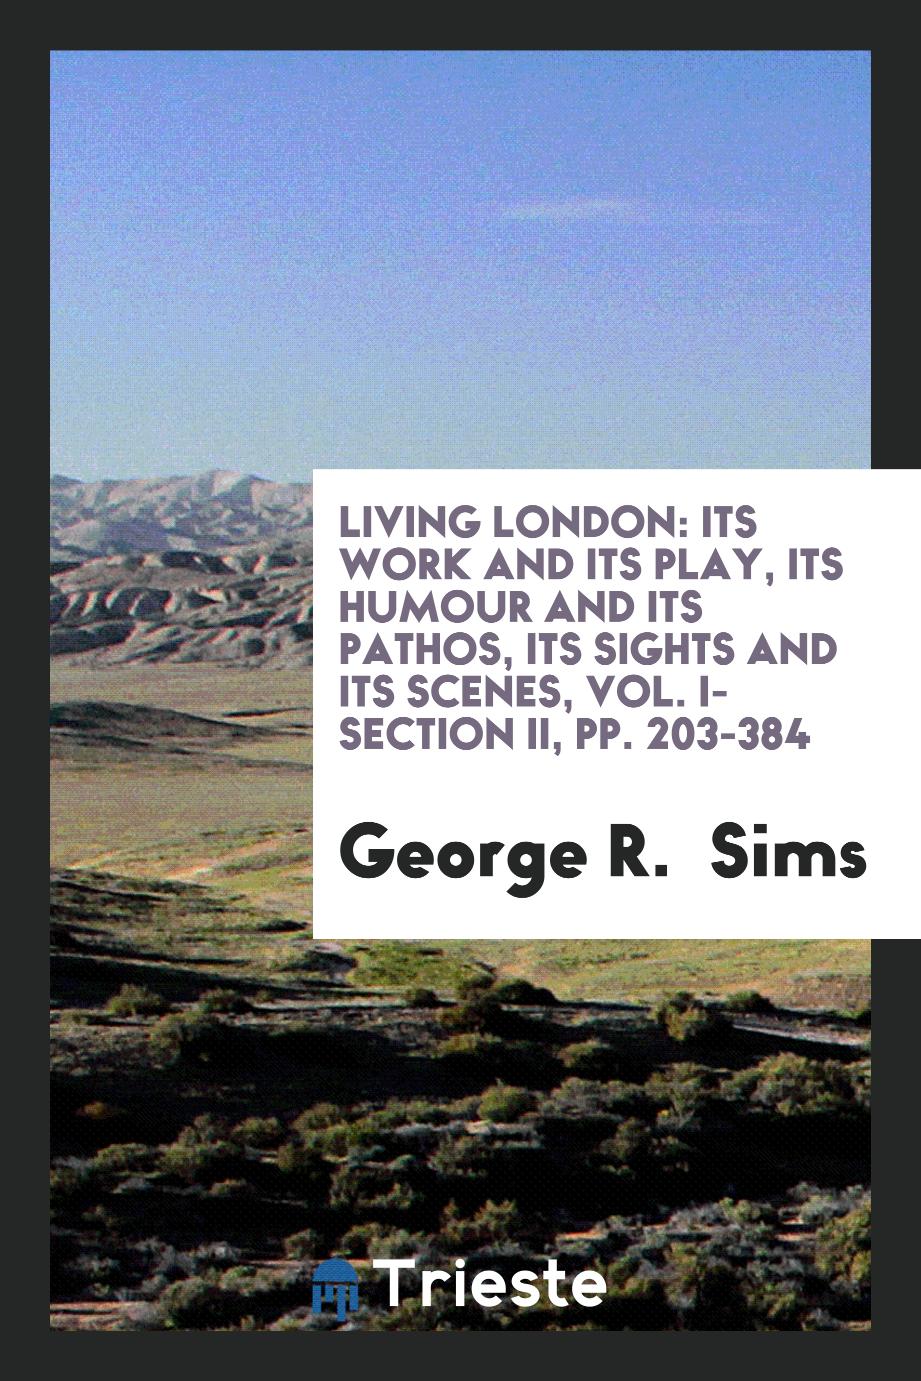 Living London: its work and its play, its humour and its pathos, its sights and its scenes, Vol. I- section II, pp. 203-384